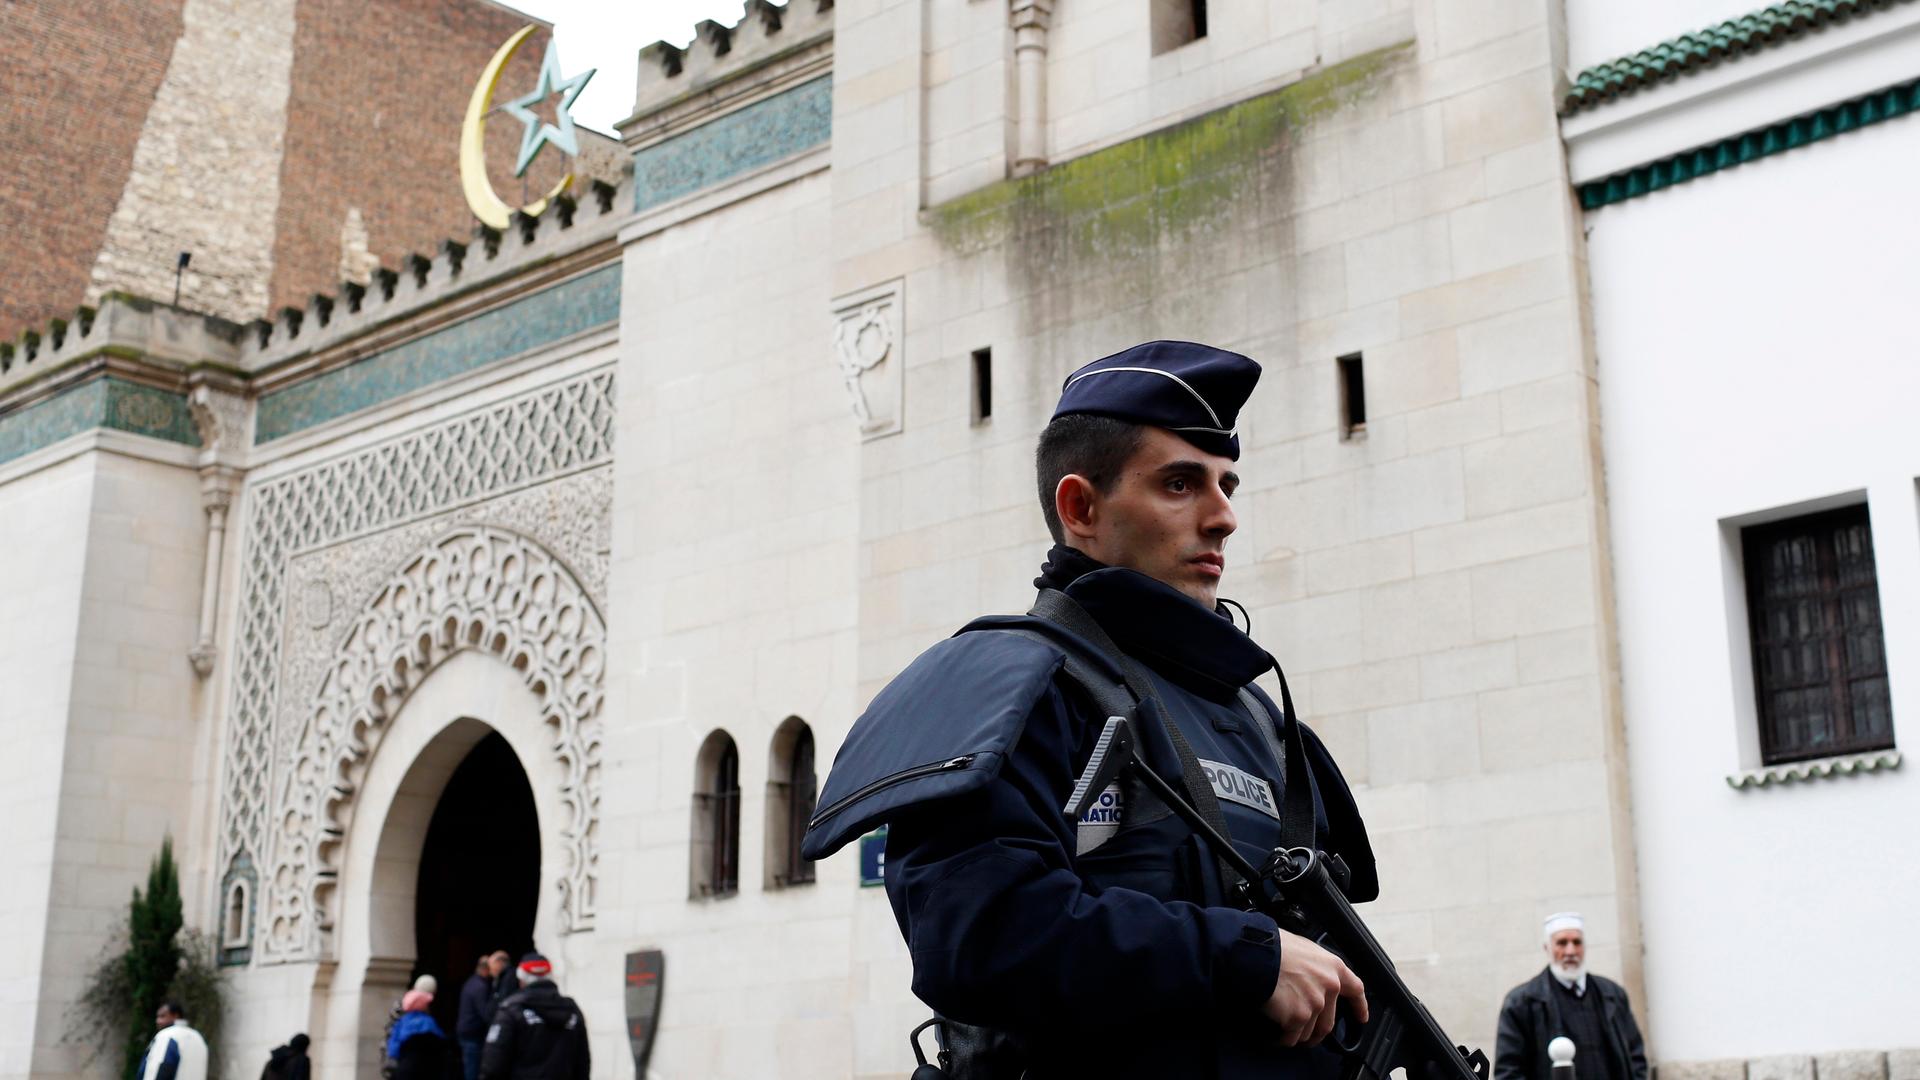 A French policeman stands in front of the entrance of Paris Mosque as French Muslims gather for Friday prayers in Paris January 9, 2015, following Wednesday's deadly attack at the Paris offices of weekly satirical newspaper Charlie Hebdo by two masked gun